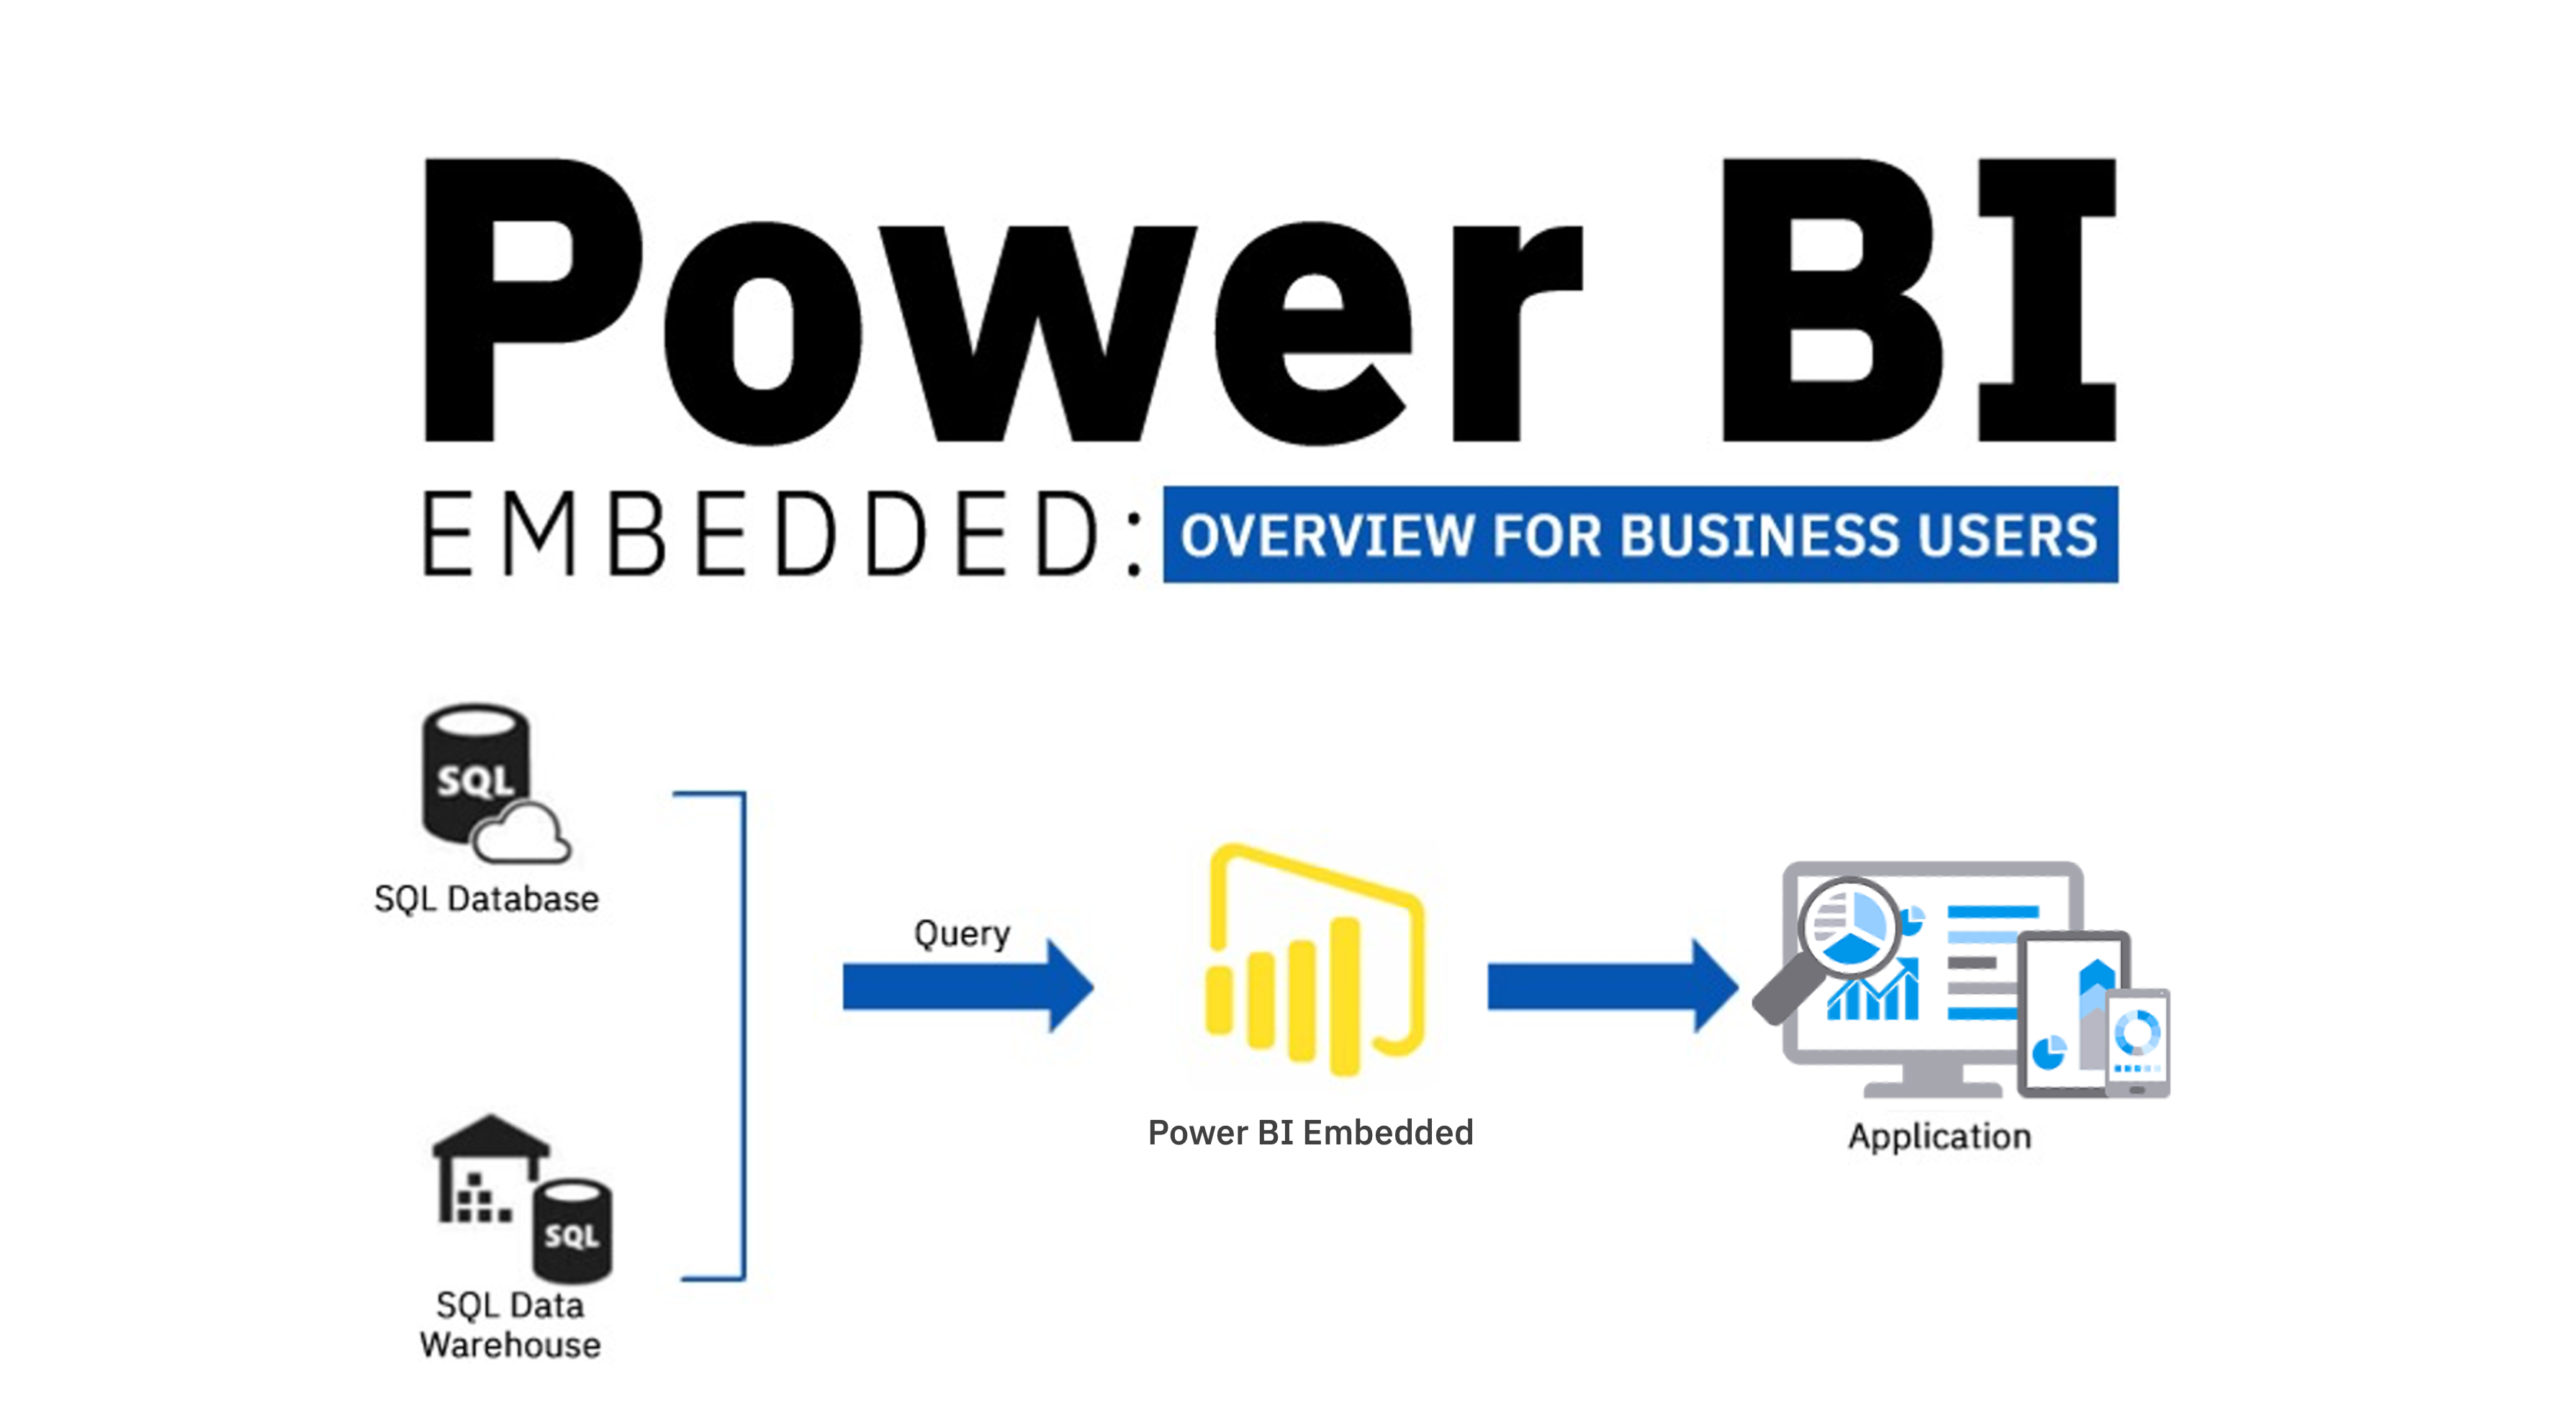 Power BI Embedded: Overview for Business Users